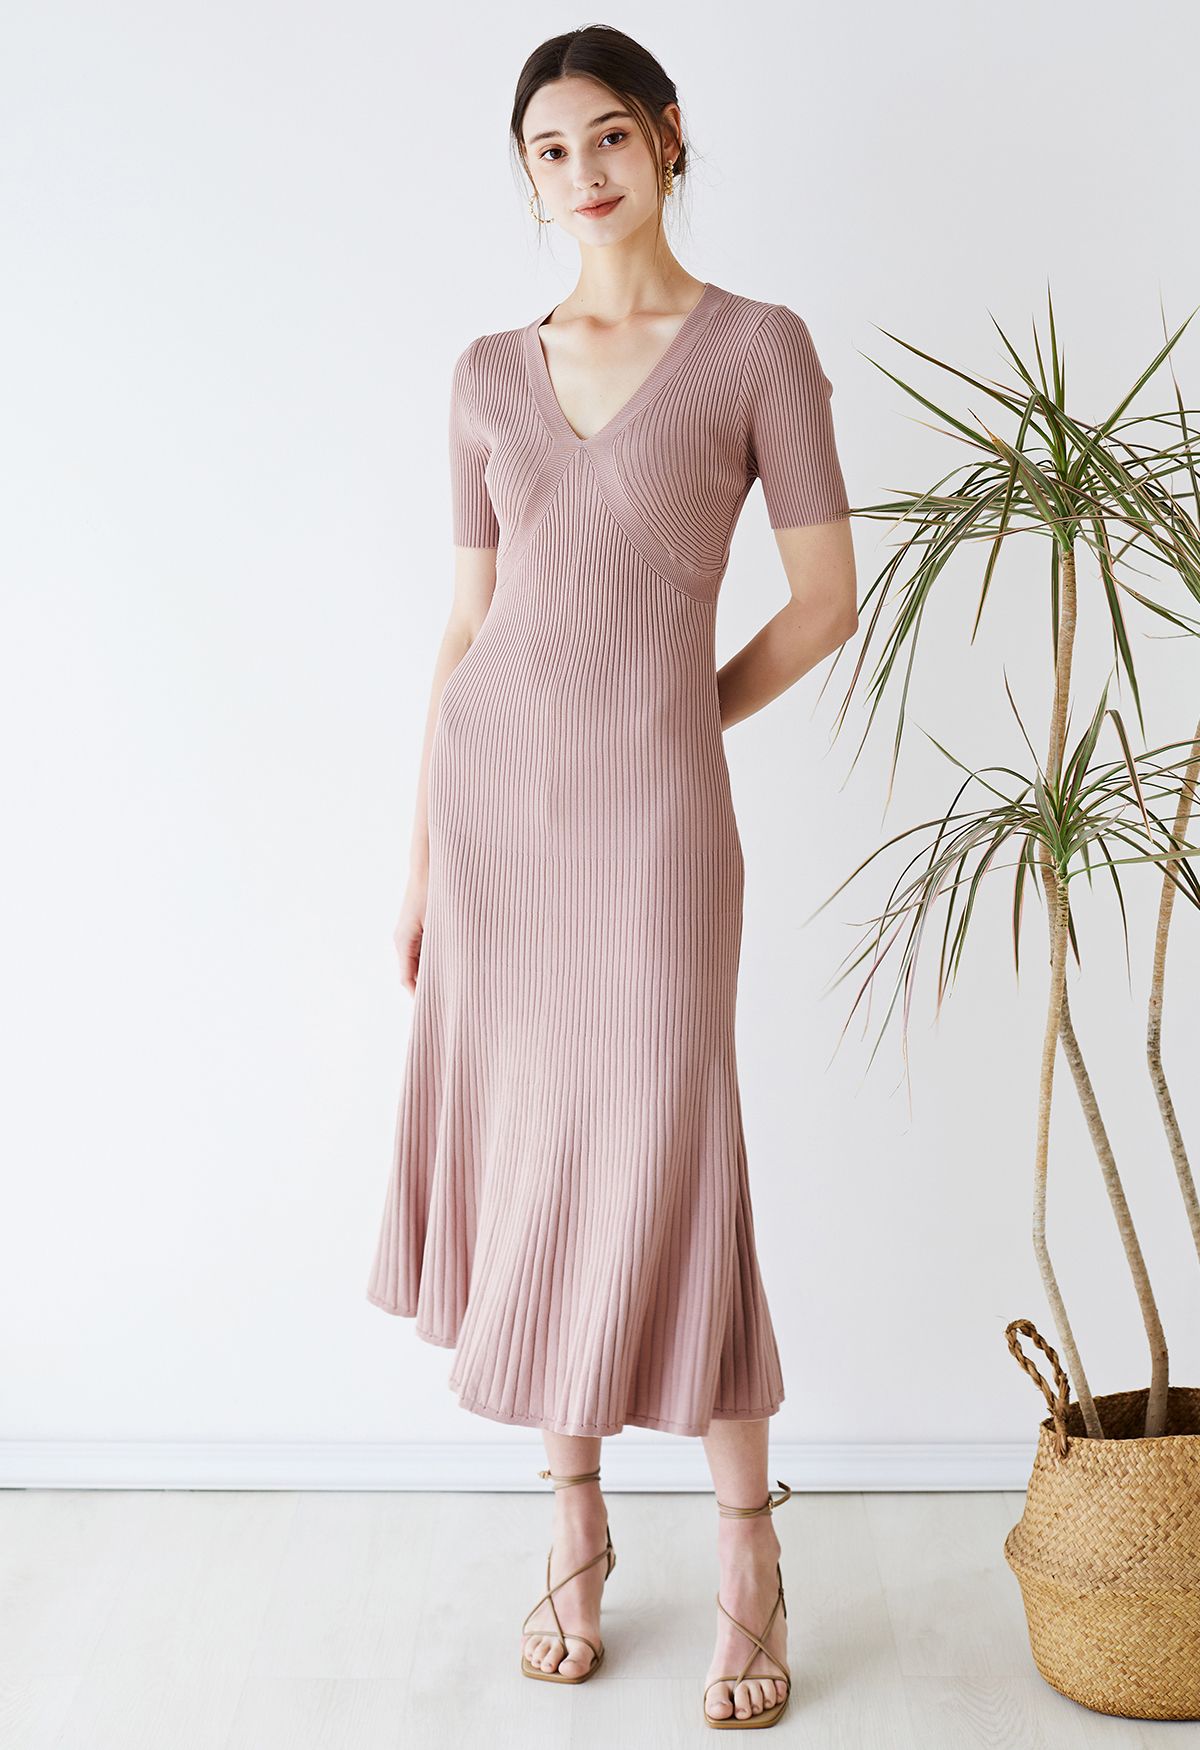 V-Neck Short Sleeve Ribbed Knit Dress in Dusty Pink